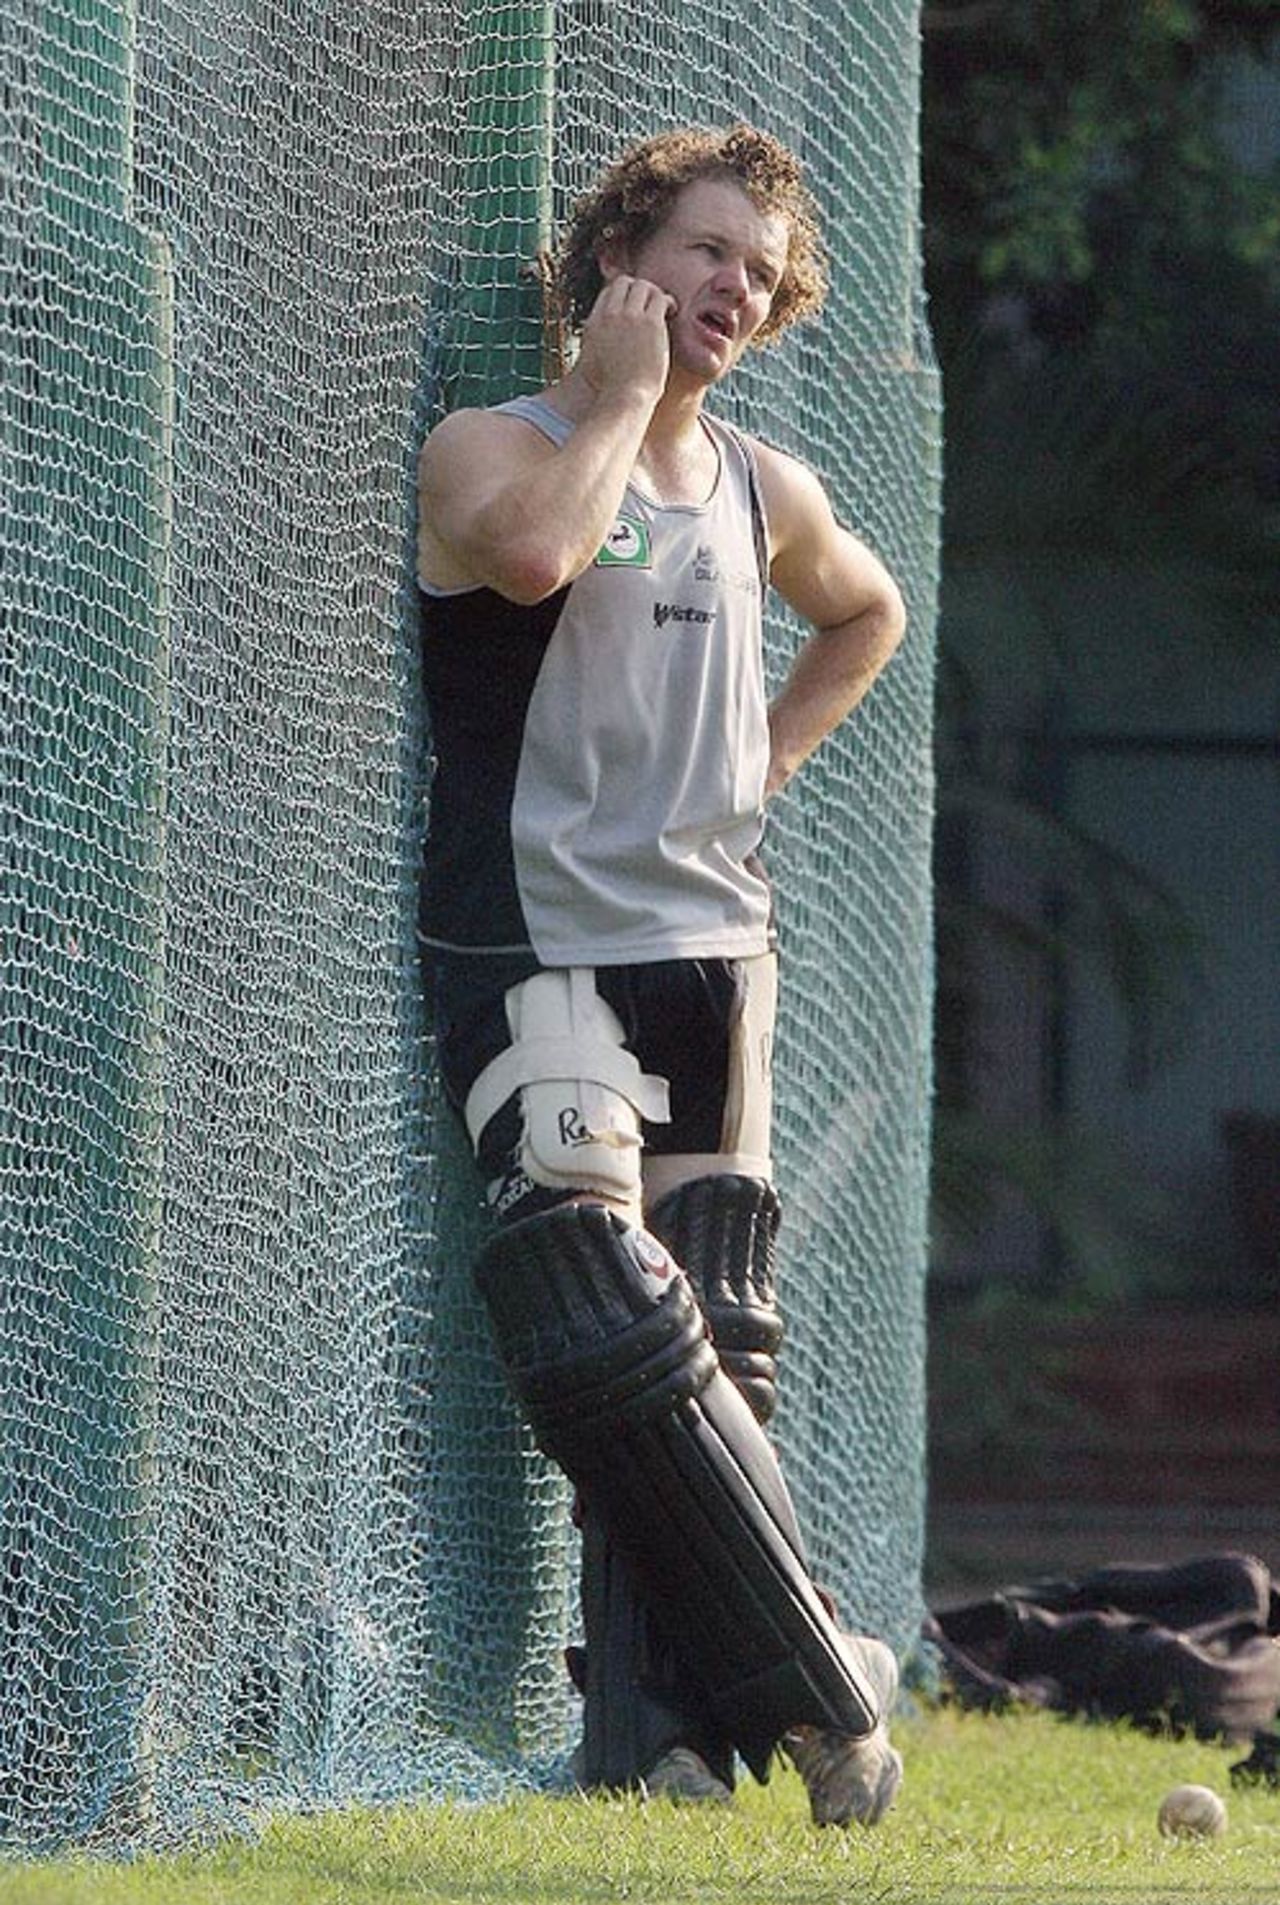 Hamish Marshall ponders his options after a net session, PCA Stadium, Mohali, October 31, 2006